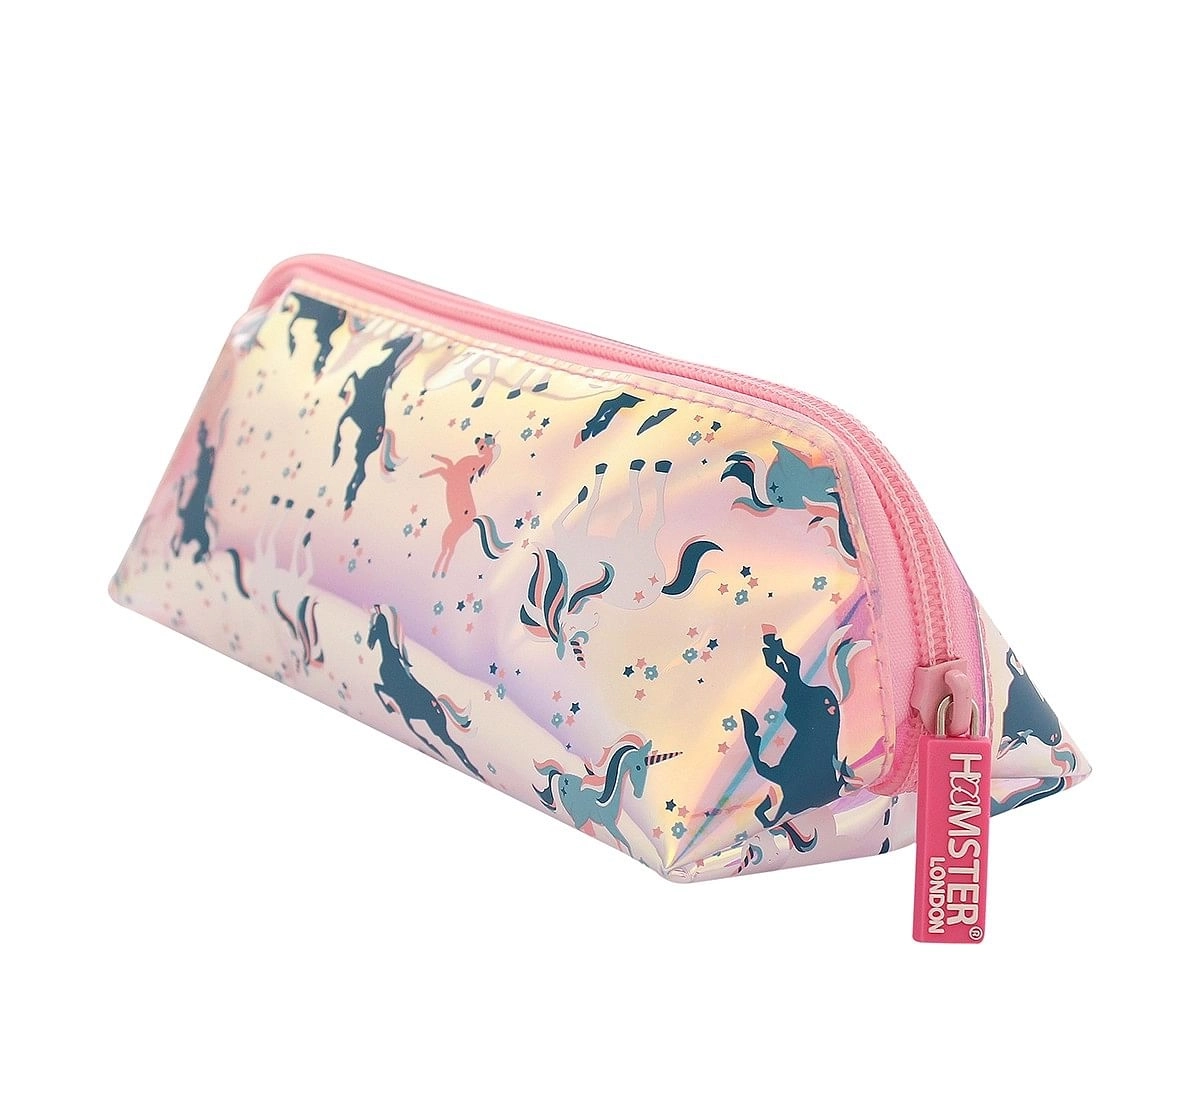 Hamster London Triangular Unicorn Pouch for age 3Y+ (Pink)